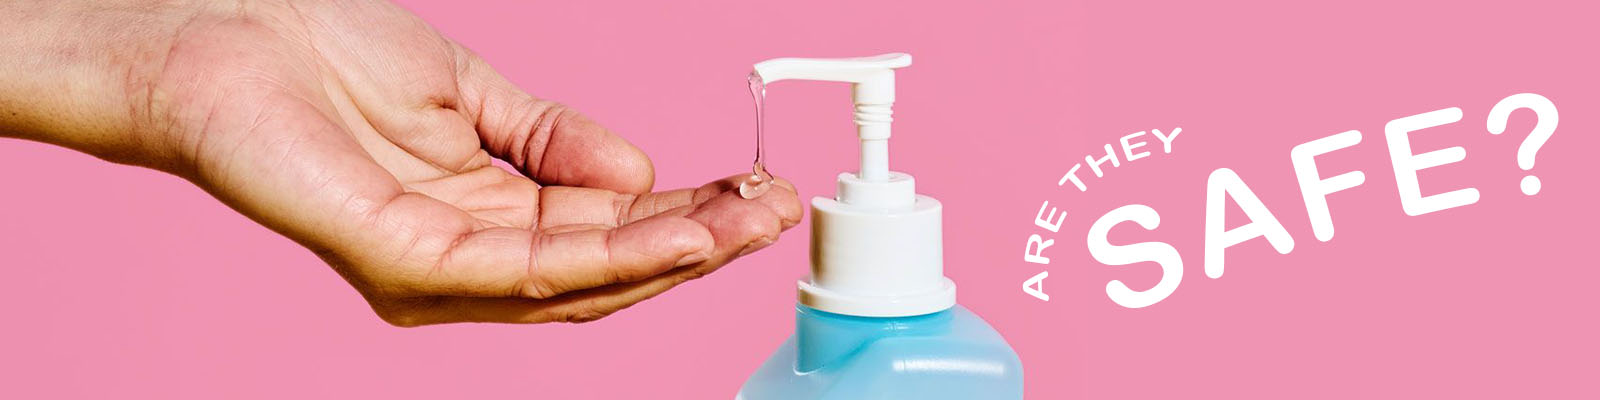 Are Hand Sanitizers are safe to use